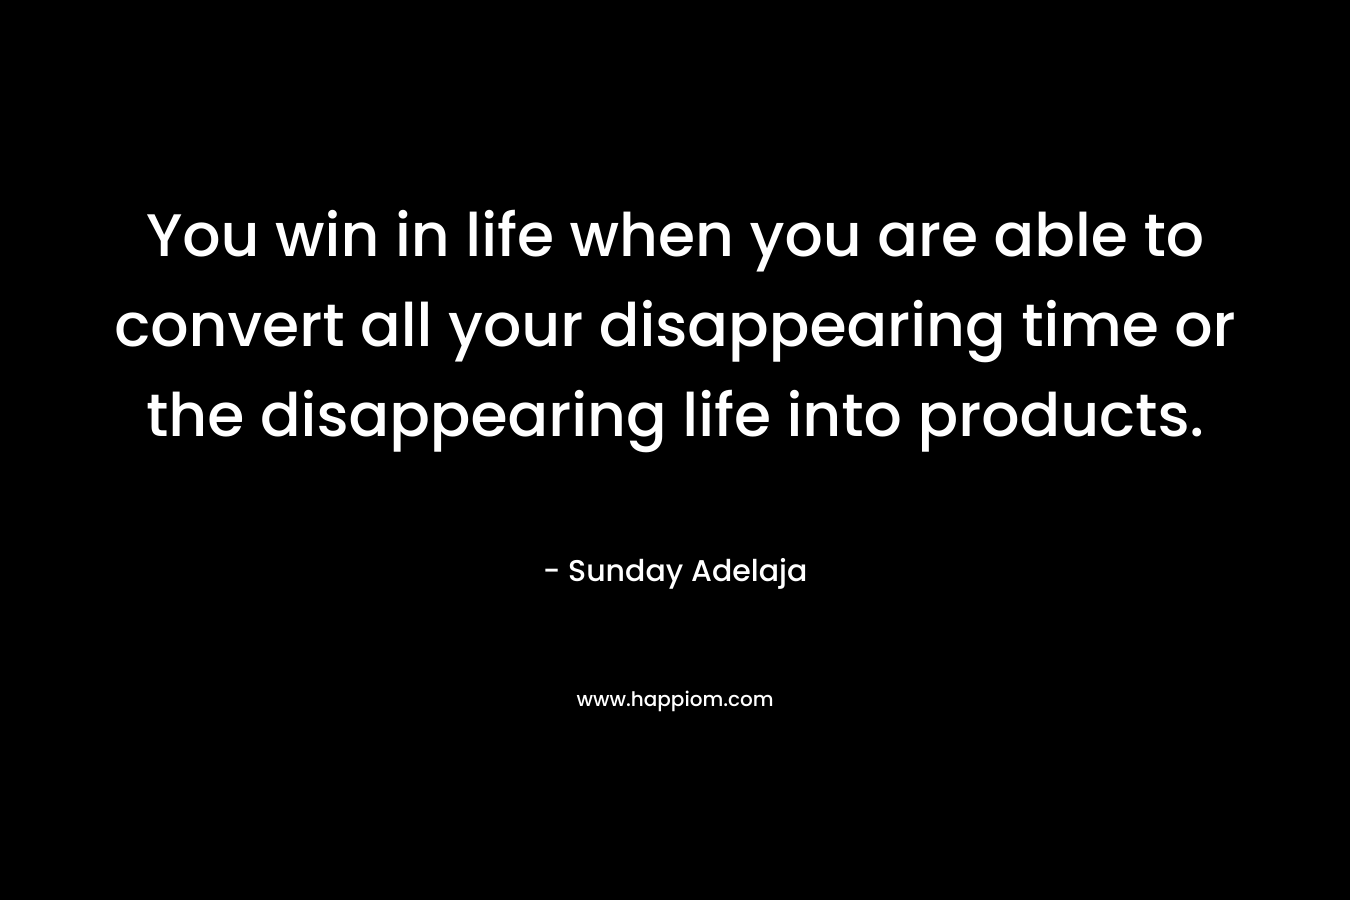 You win in life when you are able to convert all your disappearing time or the disappearing life into products.